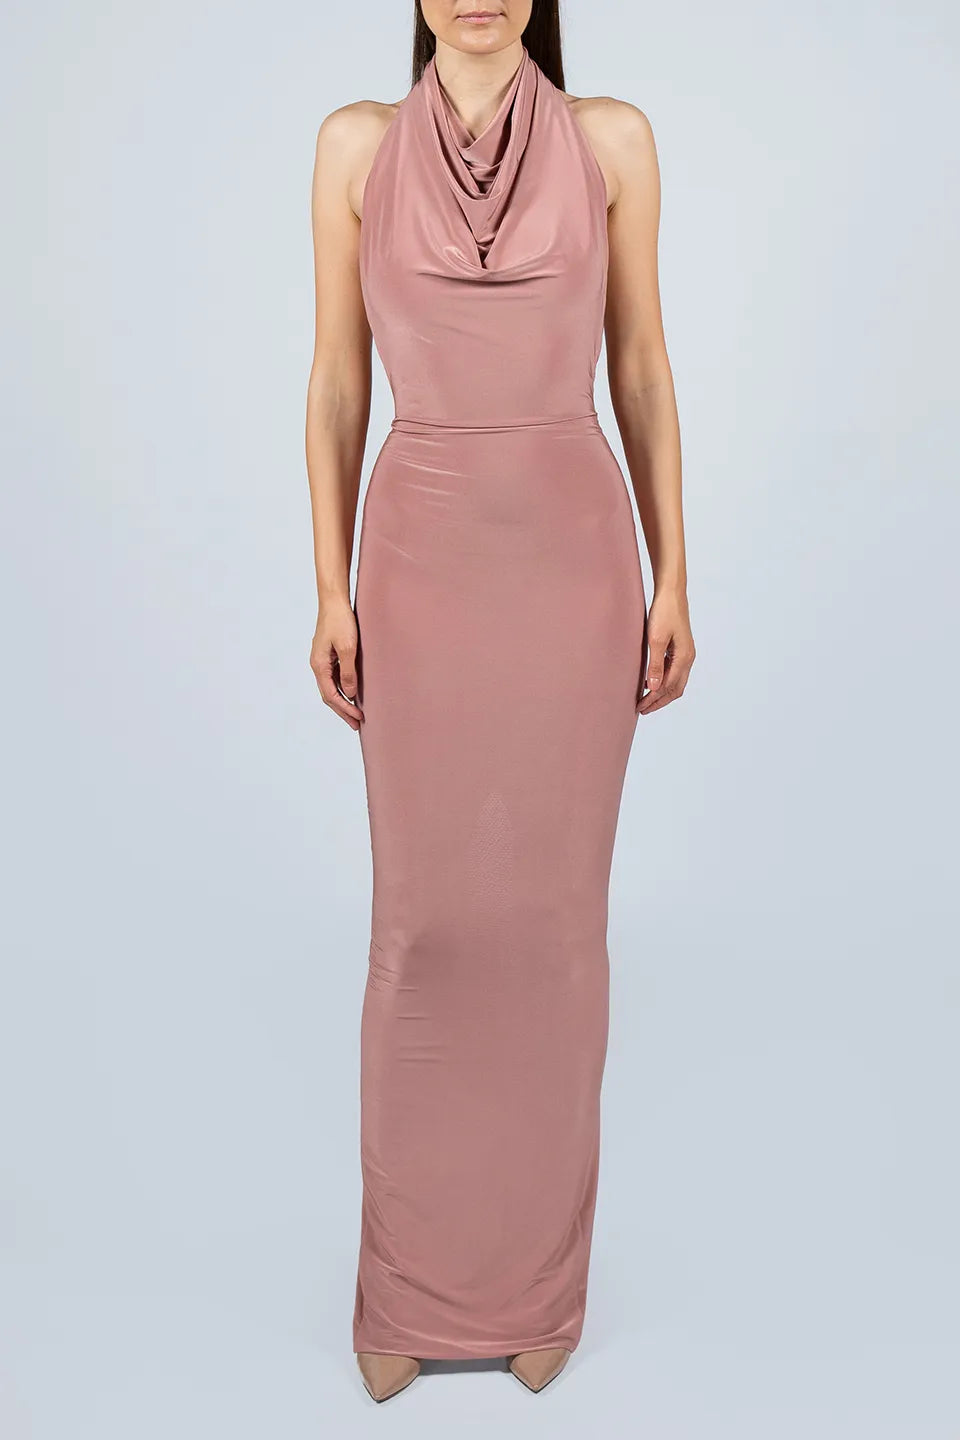 Designer Pink Maxi dresses, shop online with free delivery in UAE. Product gallery 6